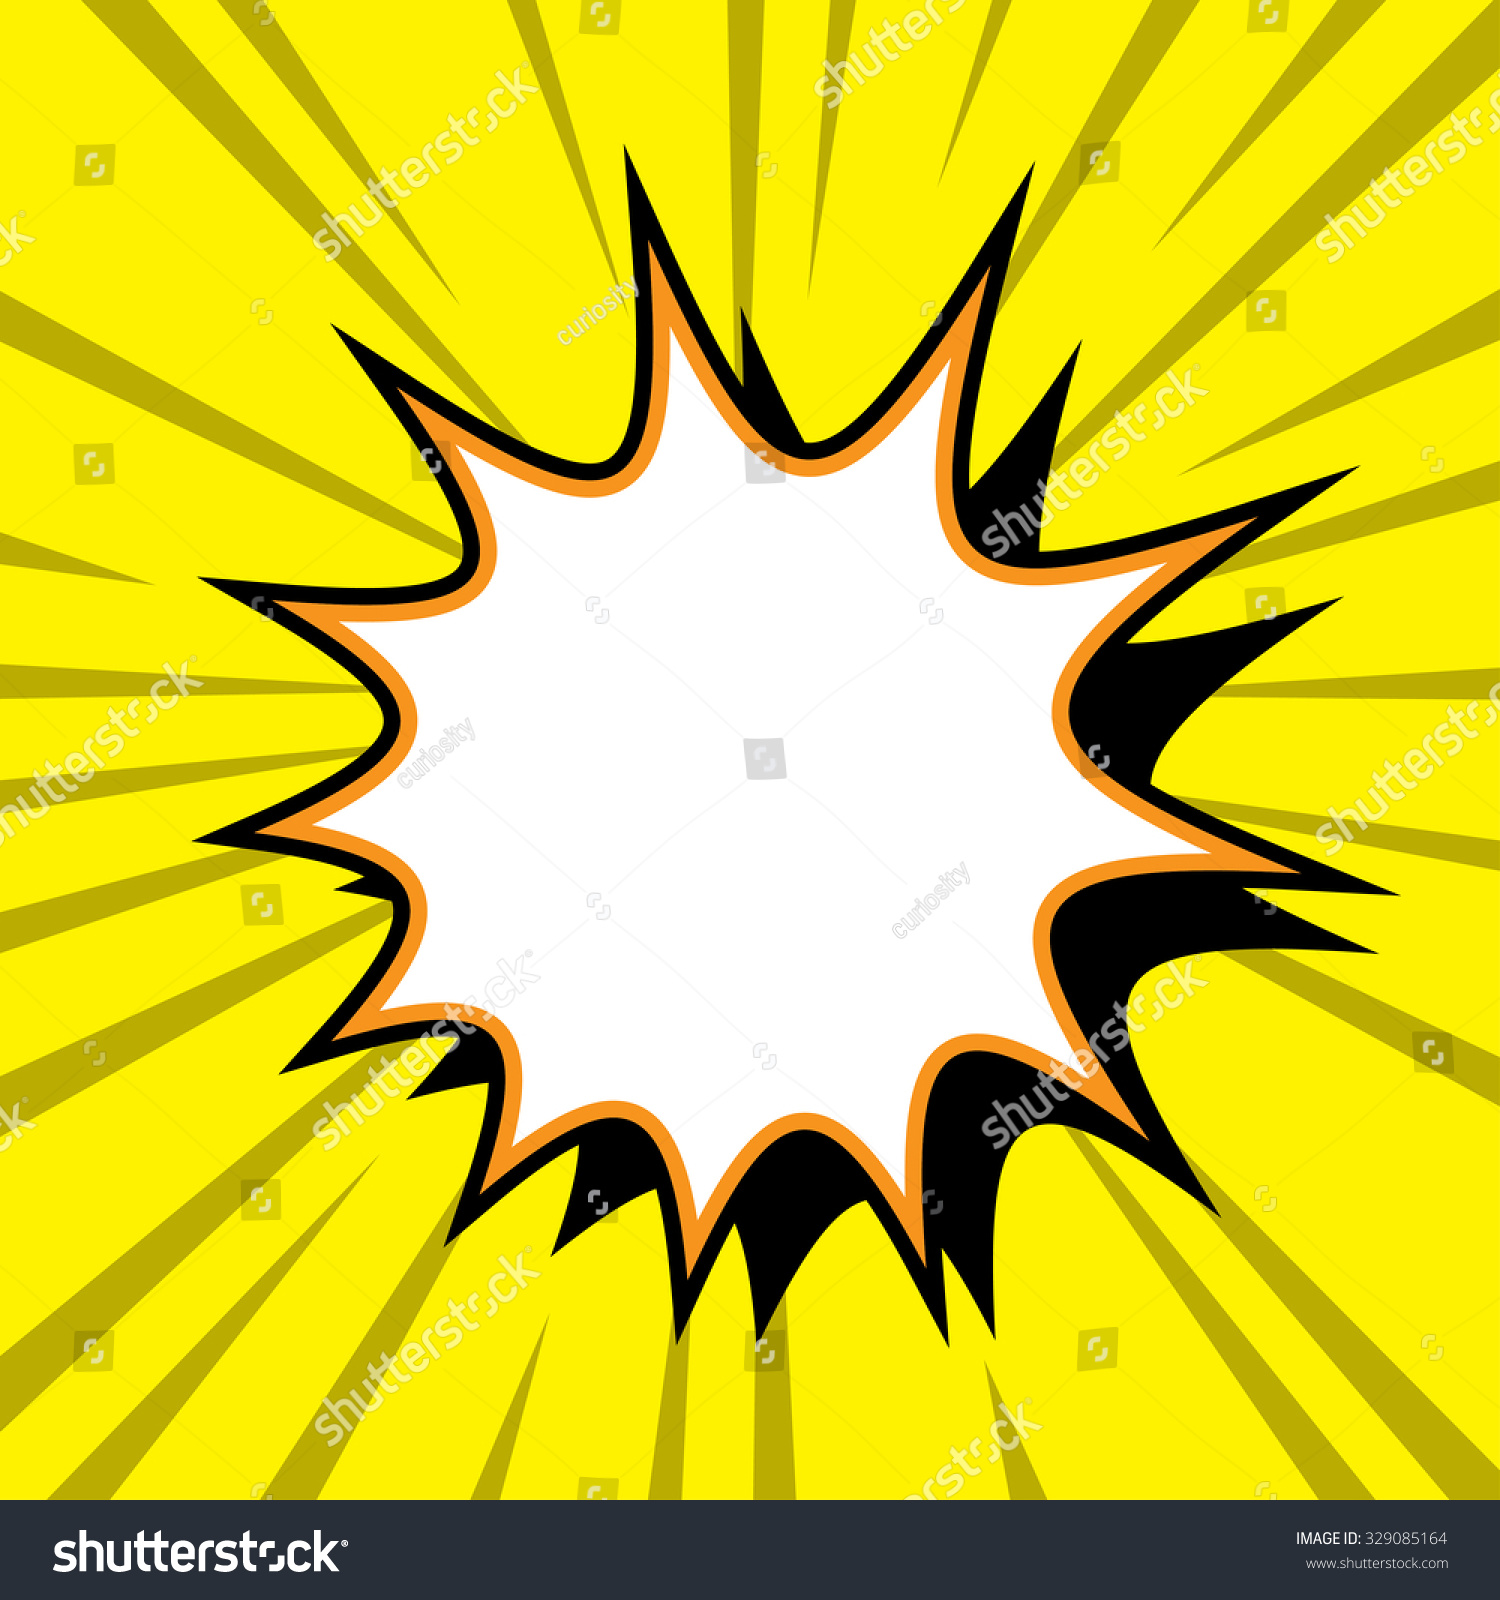 Comic Book Cartoon Background Explosion Stock Vector Royalty Free